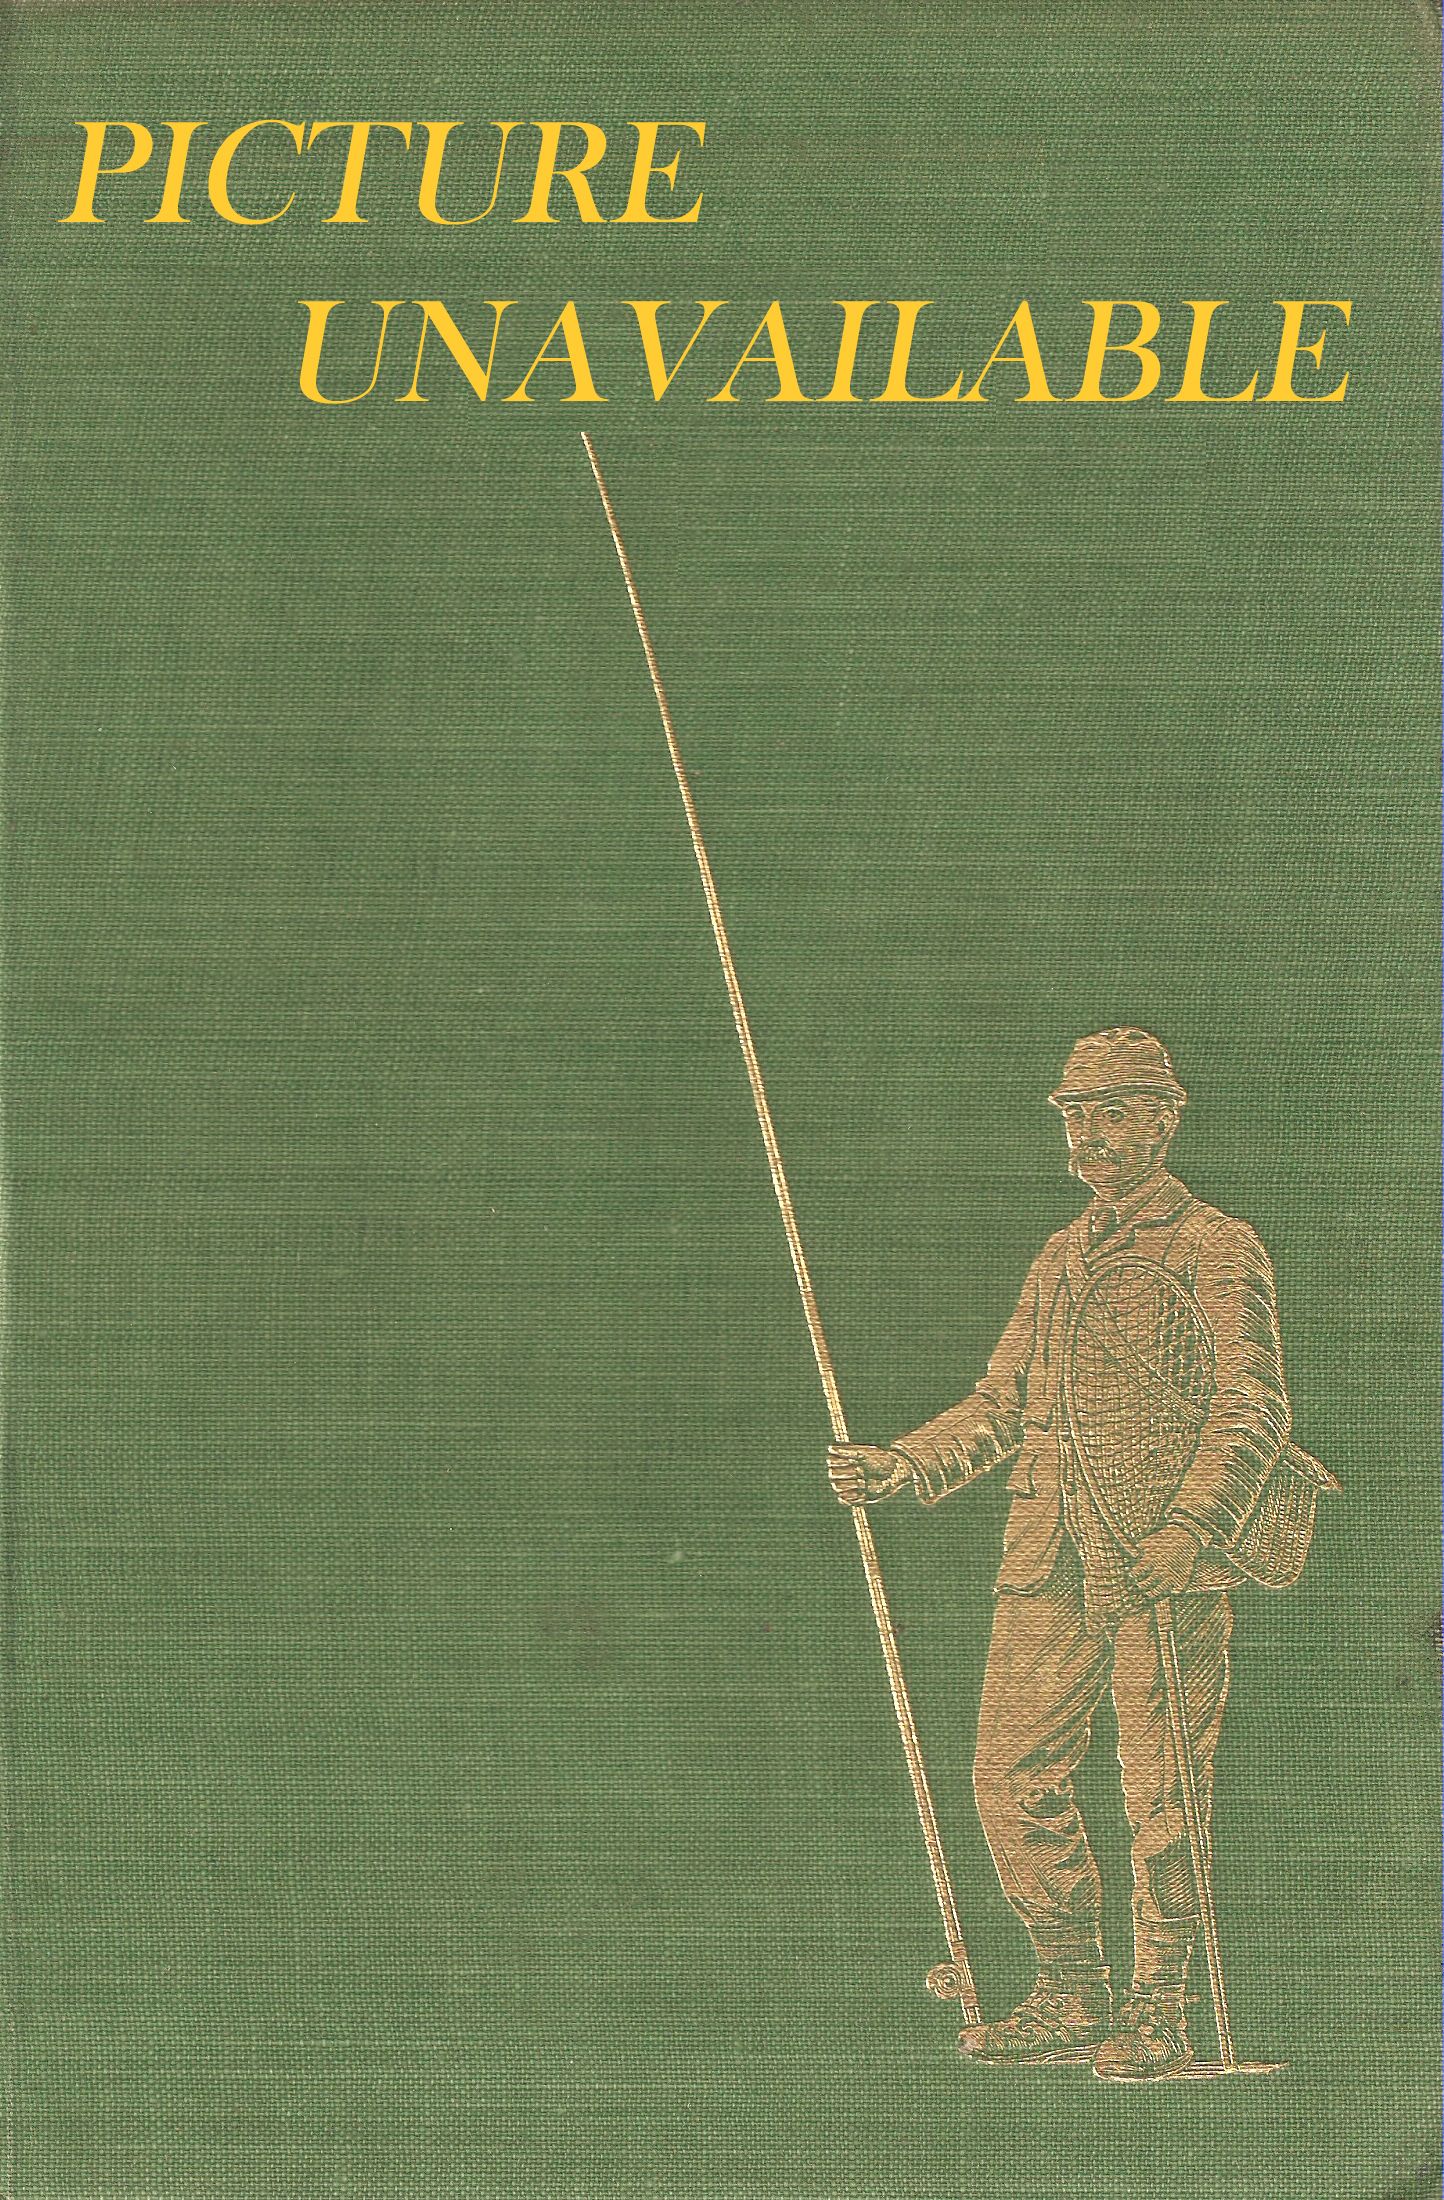 CREEL: A FISHING MAGAZINE. Volume 4, number 2. August 1966.